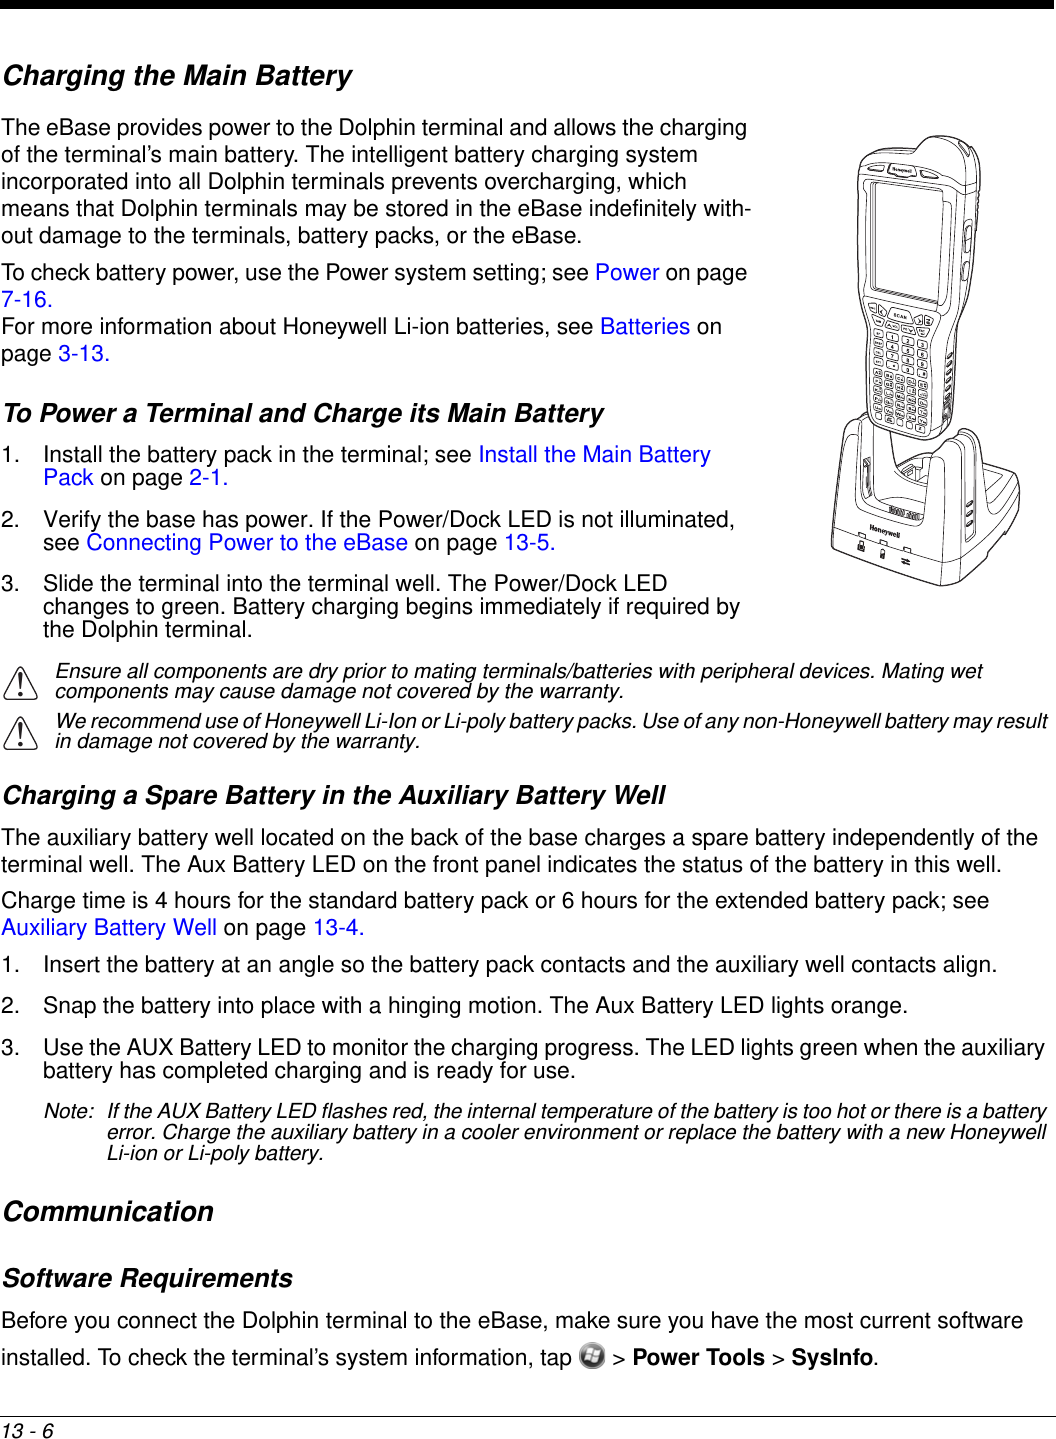 13 - 6Charging the Main BatteryThe eBase provides power to the Dolphin terminal and allows the charging of the terminal’s main battery. The intelligent battery charging system incorporated into all Dolphin terminals prevents overcharging, which means that Dolphin terminals may be stored in the eBase indefinitely with-out damage to the terminals, battery packs, or the eBase.To check battery power, use the Power system setting; see Power on page 7-16.For more information about Honeywell Li-ion batteries, see Batteries on page 3-13.To Power a Terminal and Charge its Main Battery1. Install the battery pack in the terminal; see Install the Main Battery Pack on page 2-1.2. Verify the base has power. If the Power/Dock LED is not illuminated, see Connecting Power to the eBase on page 13-5.3. Slide the terminal into the terminal well. The Power/Dock LED changes to green. Battery charging begins immediately if required by the Dolphin terminal.Ensure all components are dry prior to mating terminals/batteries with peripheral devices. Mating wet components may cause damage not covered by the warranty.We recommend use of Honeywell Li-Ion or Li-poly battery packs. Use of any non-Honeywell battery may result in damage not covered by the warranty. Charging a Spare Battery in the Auxiliary Battery Well The auxiliary battery well located on the back of the base charges a spare battery independently of the terminal well. The Aux Battery LED on the front panel indicates the status of the battery in this well. Charge time is 4 hours for the standard battery pack or 6 hours for the extended battery pack; see Auxiliary Battery Well on page 13-4.1. Insert the battery at an angle so the battery pack contacts and the auxiliary well contacts align. 2. Snap the battery into place with a hinging motion. The Aux Battery LED lights orange.3. Use the AUX Battery LED to monitor the charging progress. The LED lights green when the auxiliary battery has completed charging and is ready for use.Note: If the AUX Battery LED flashes red, the internal temperature of the battery is too hot or there is a battery error. Charge the auxiliary battery in a cooler environment or replace the battery with a new Honeywell Li-ion or Li-poly battery.CommunicationSoftware RequirementsBefore you connect the Dolphin terminal to the eBase, make sure you have the most current software installed. To check the terminal’s system information, tap   &gt; Power Tools &gt; SysInfo. !!